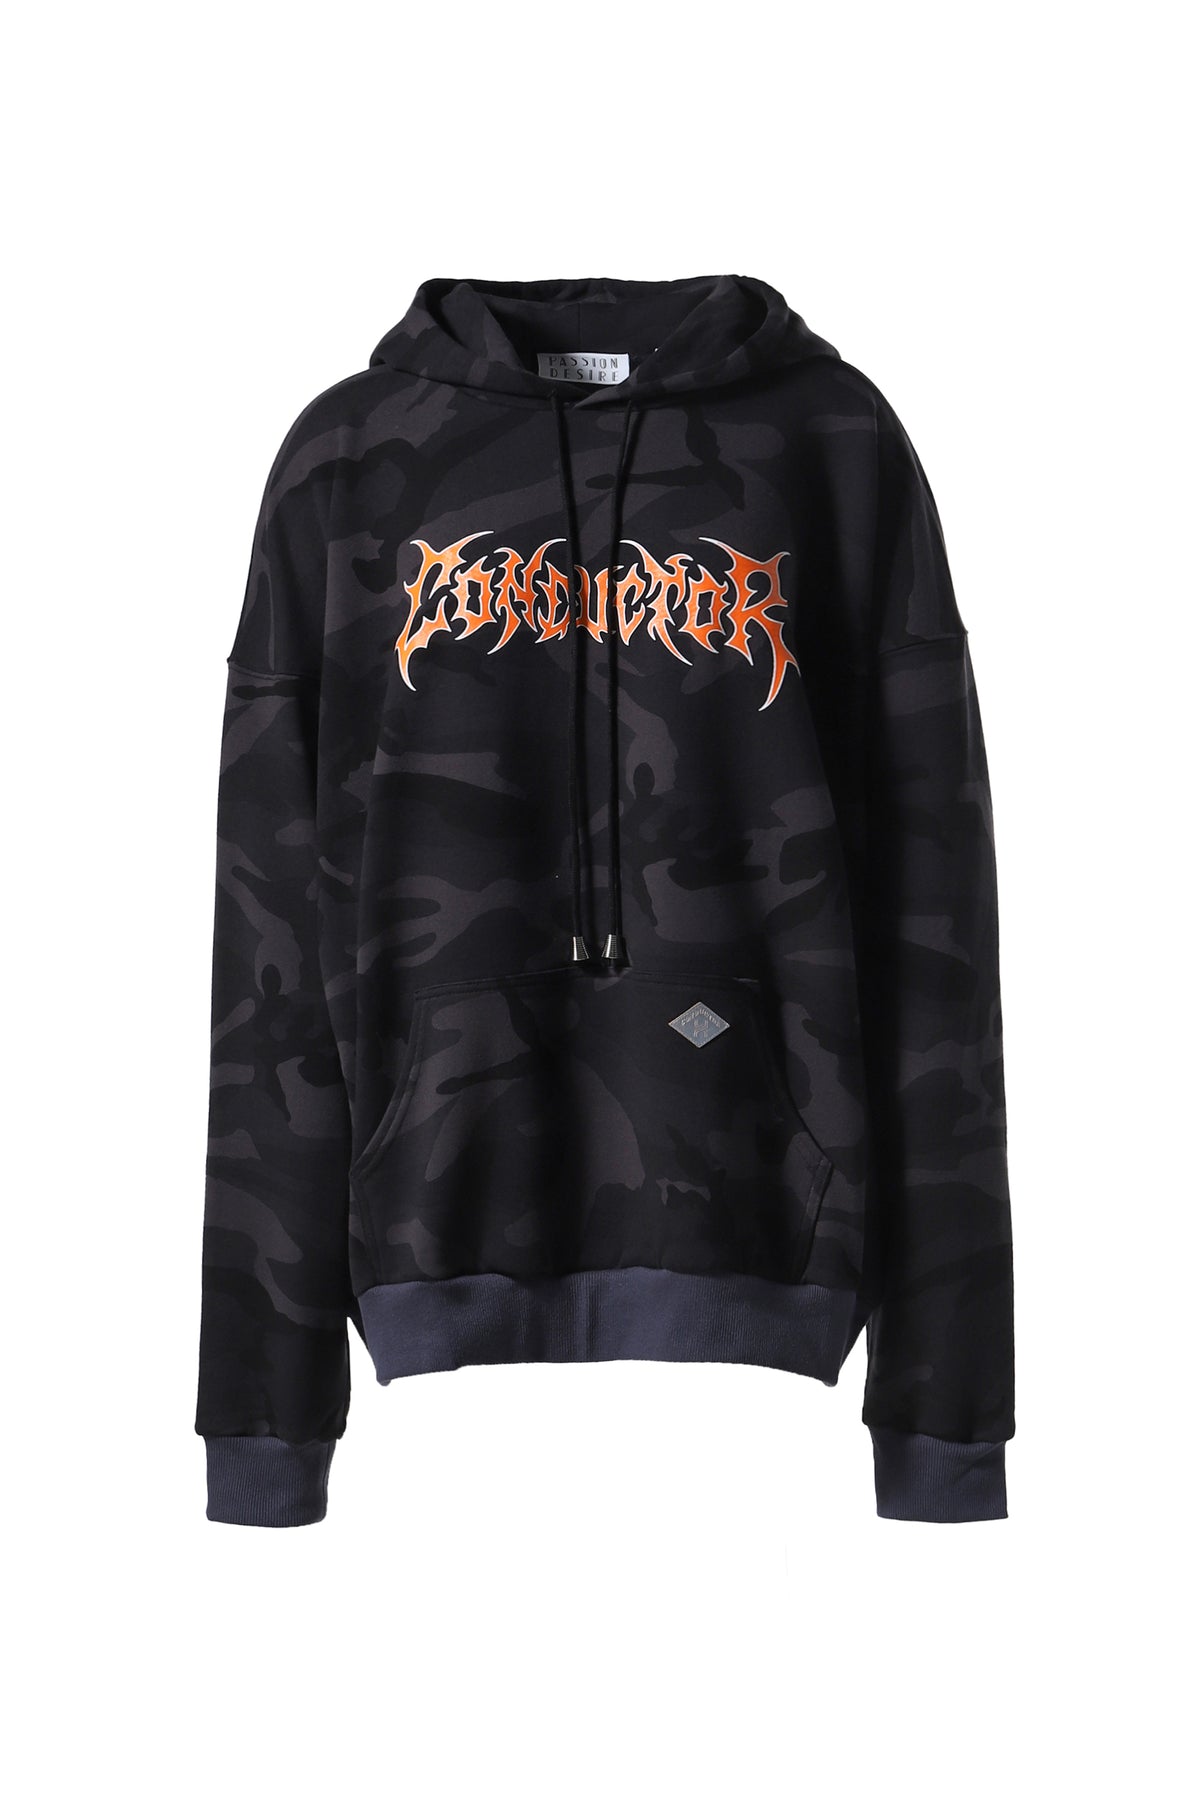 CAMOUFLAGE HOODED SWEATER / BLK